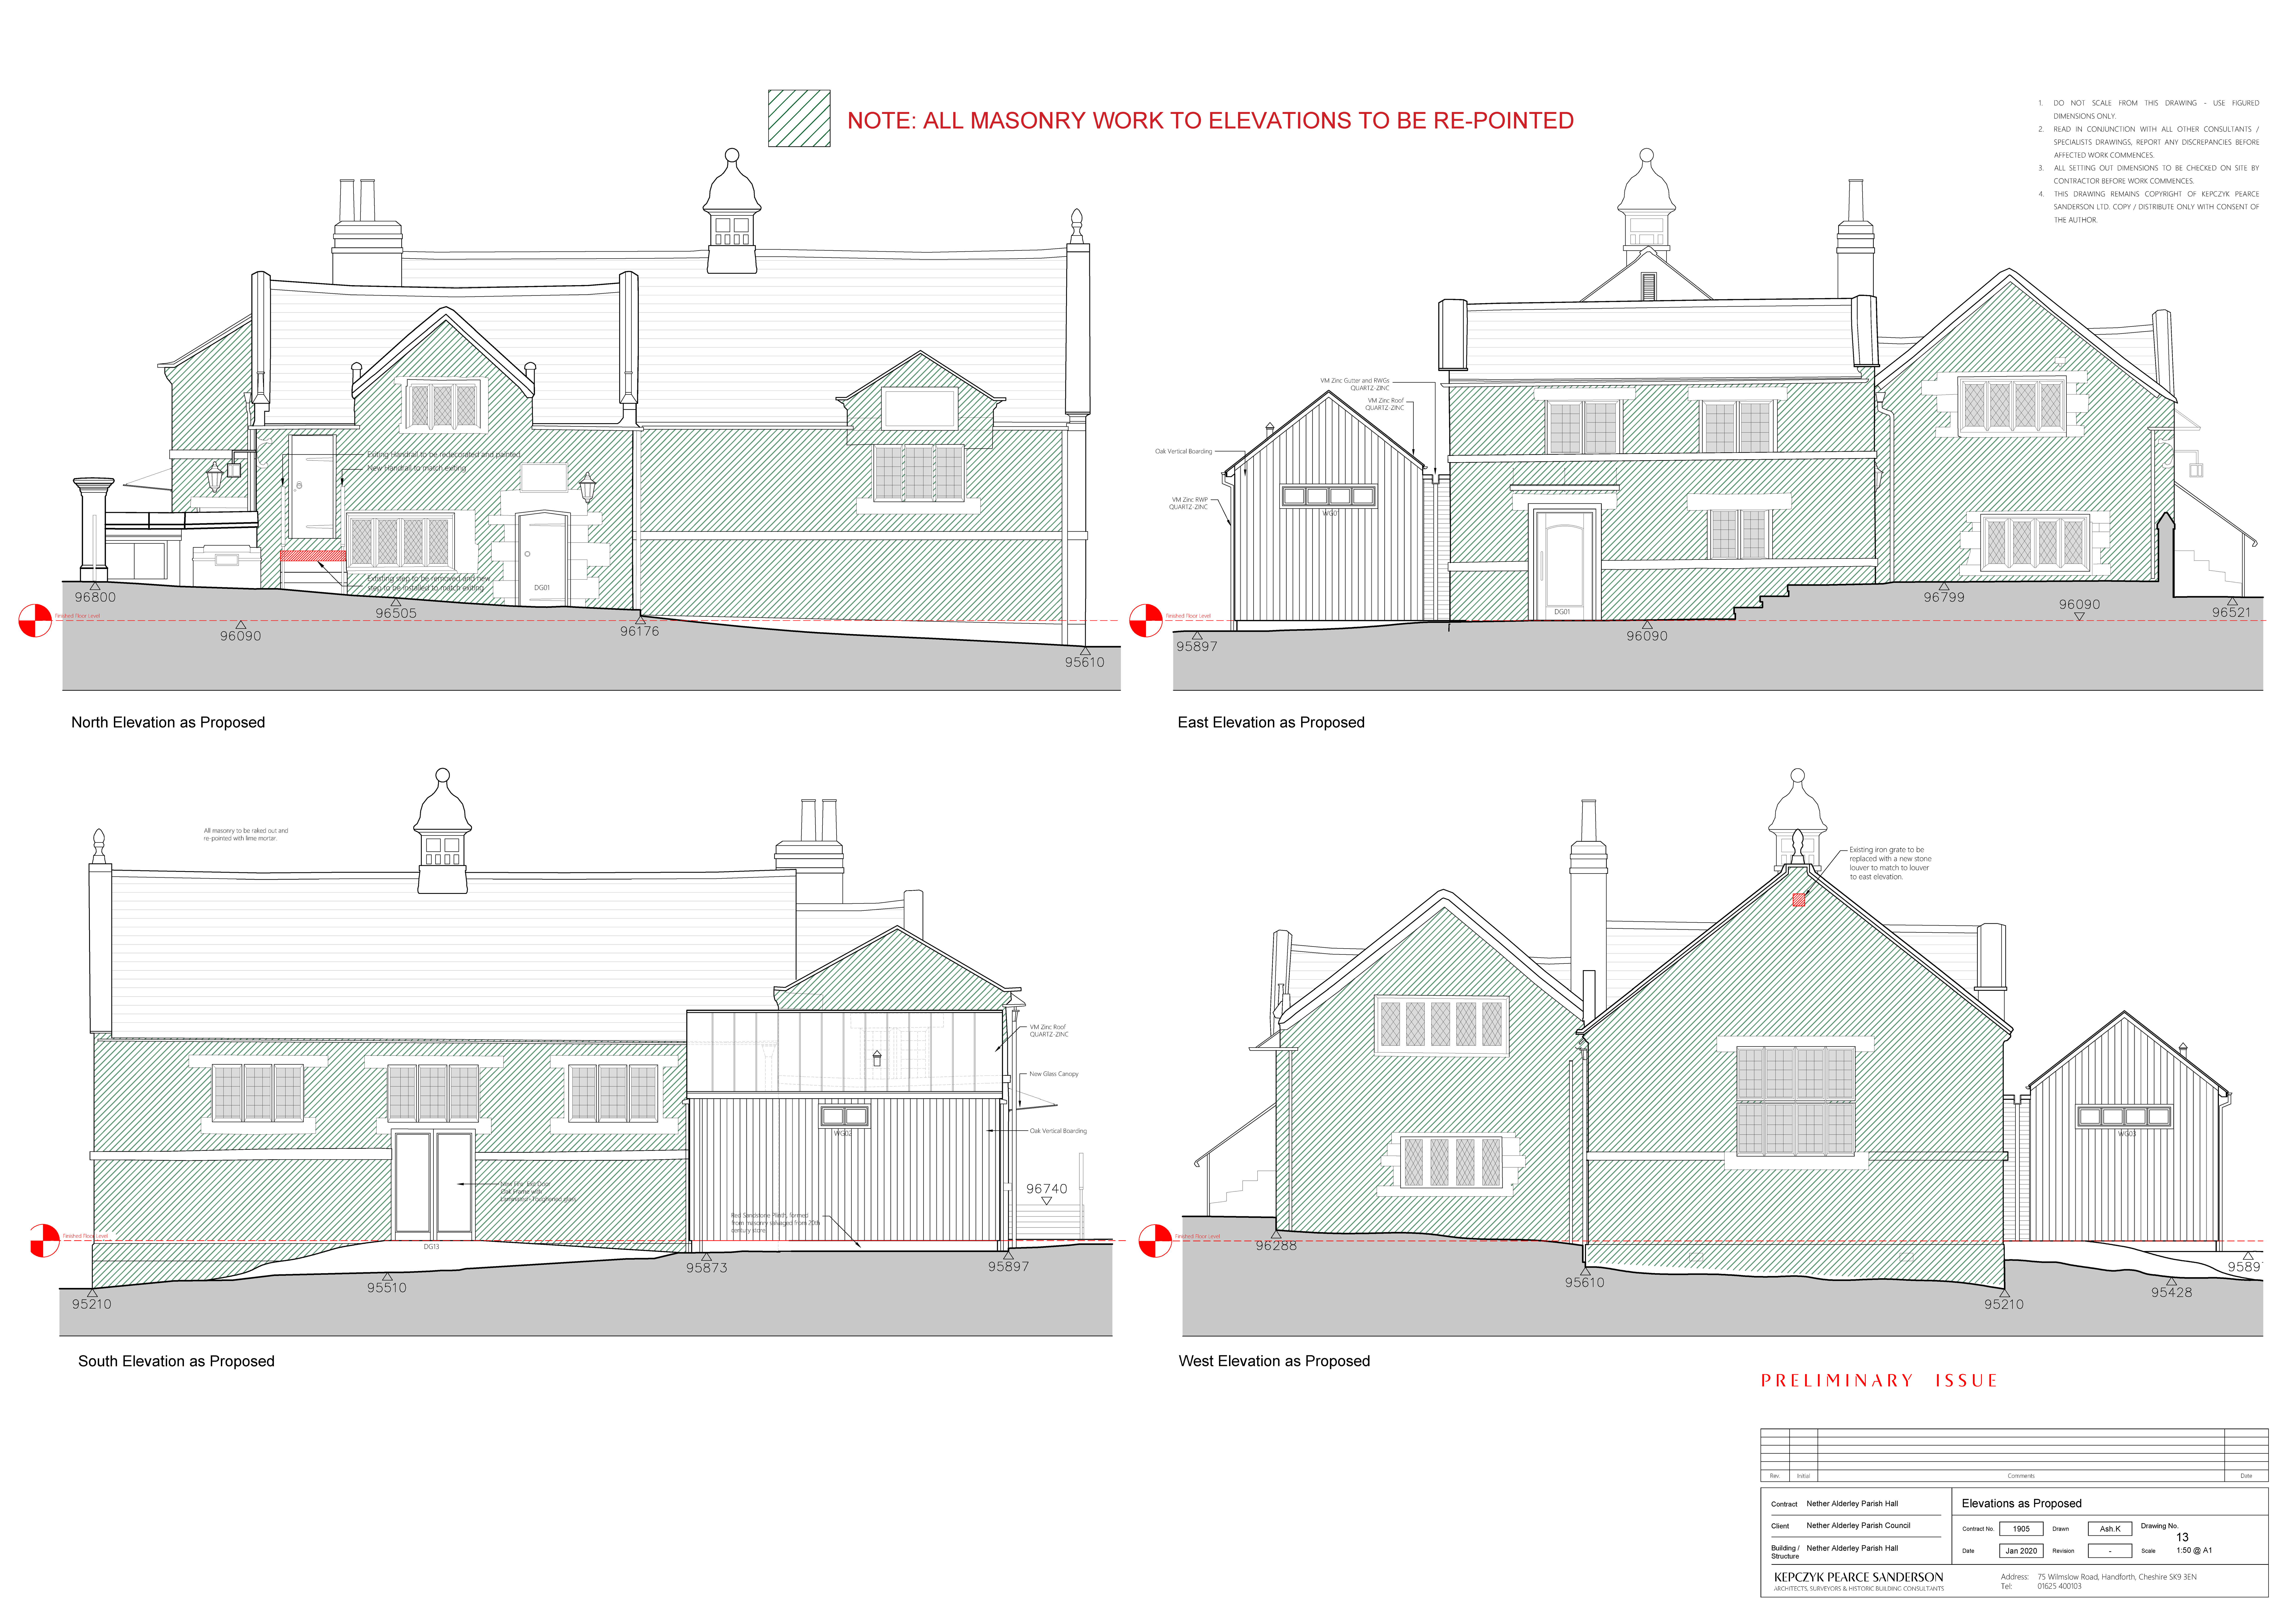 Refurbishment Plans of the Parish Hall – Click on the images to enlarge them